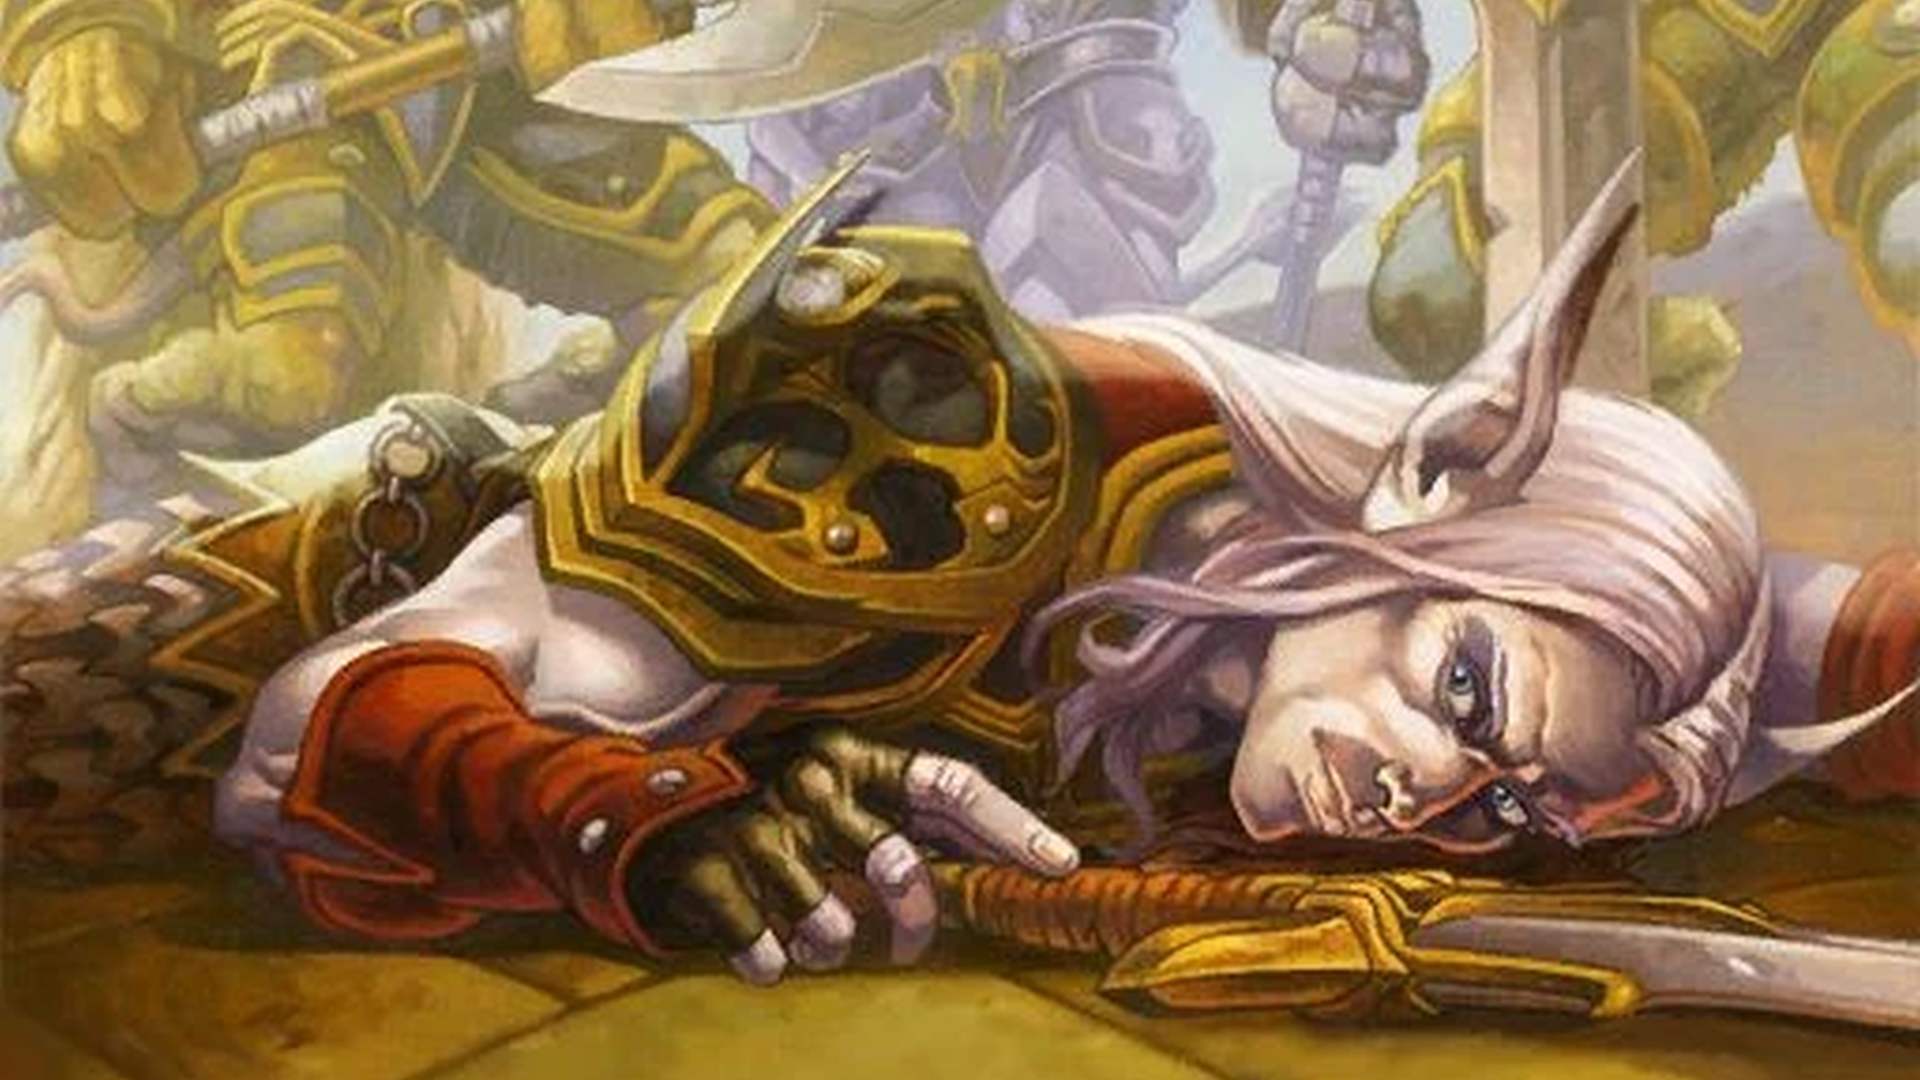 World of Warcraft player stopped for tea and died after using Feign Death for too long. 